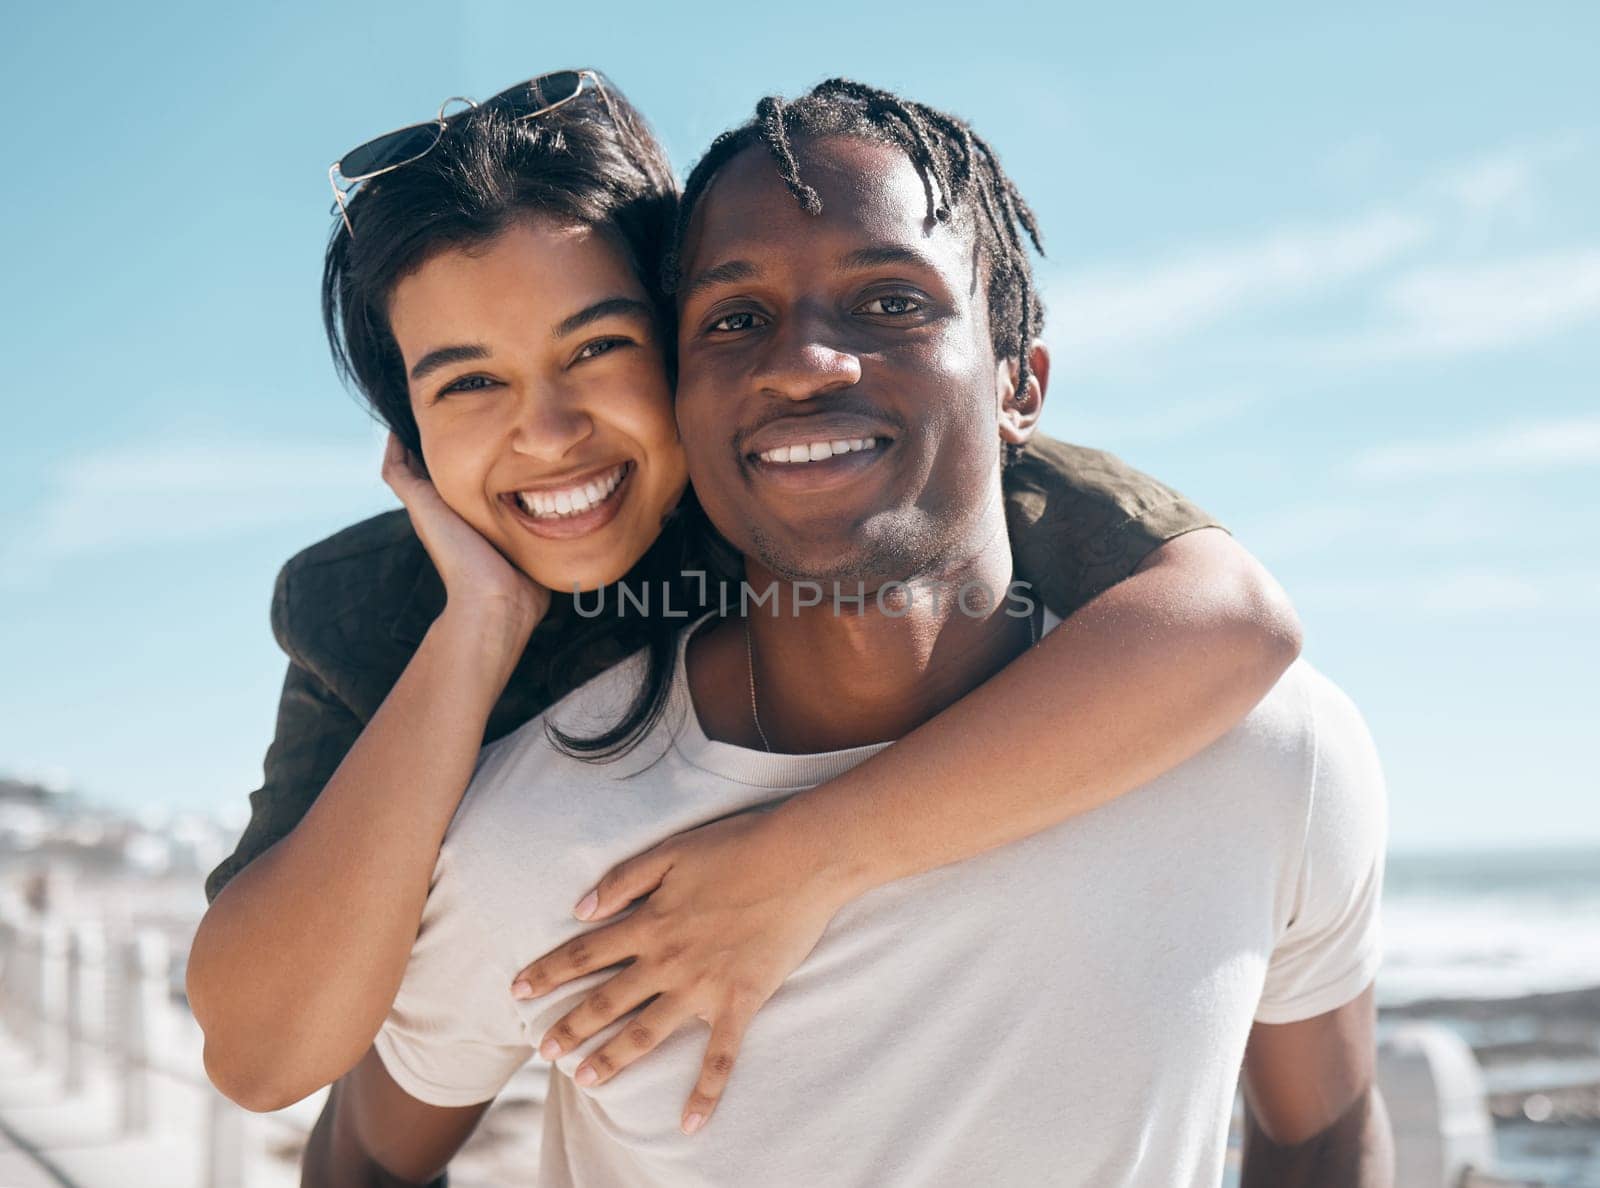 Happy couple, portrait and piggyback by beach in relax romance holiday, love vacation date or summer travel location. Smile, bonding and man carrying black woman in fun game, freedom trust or support.